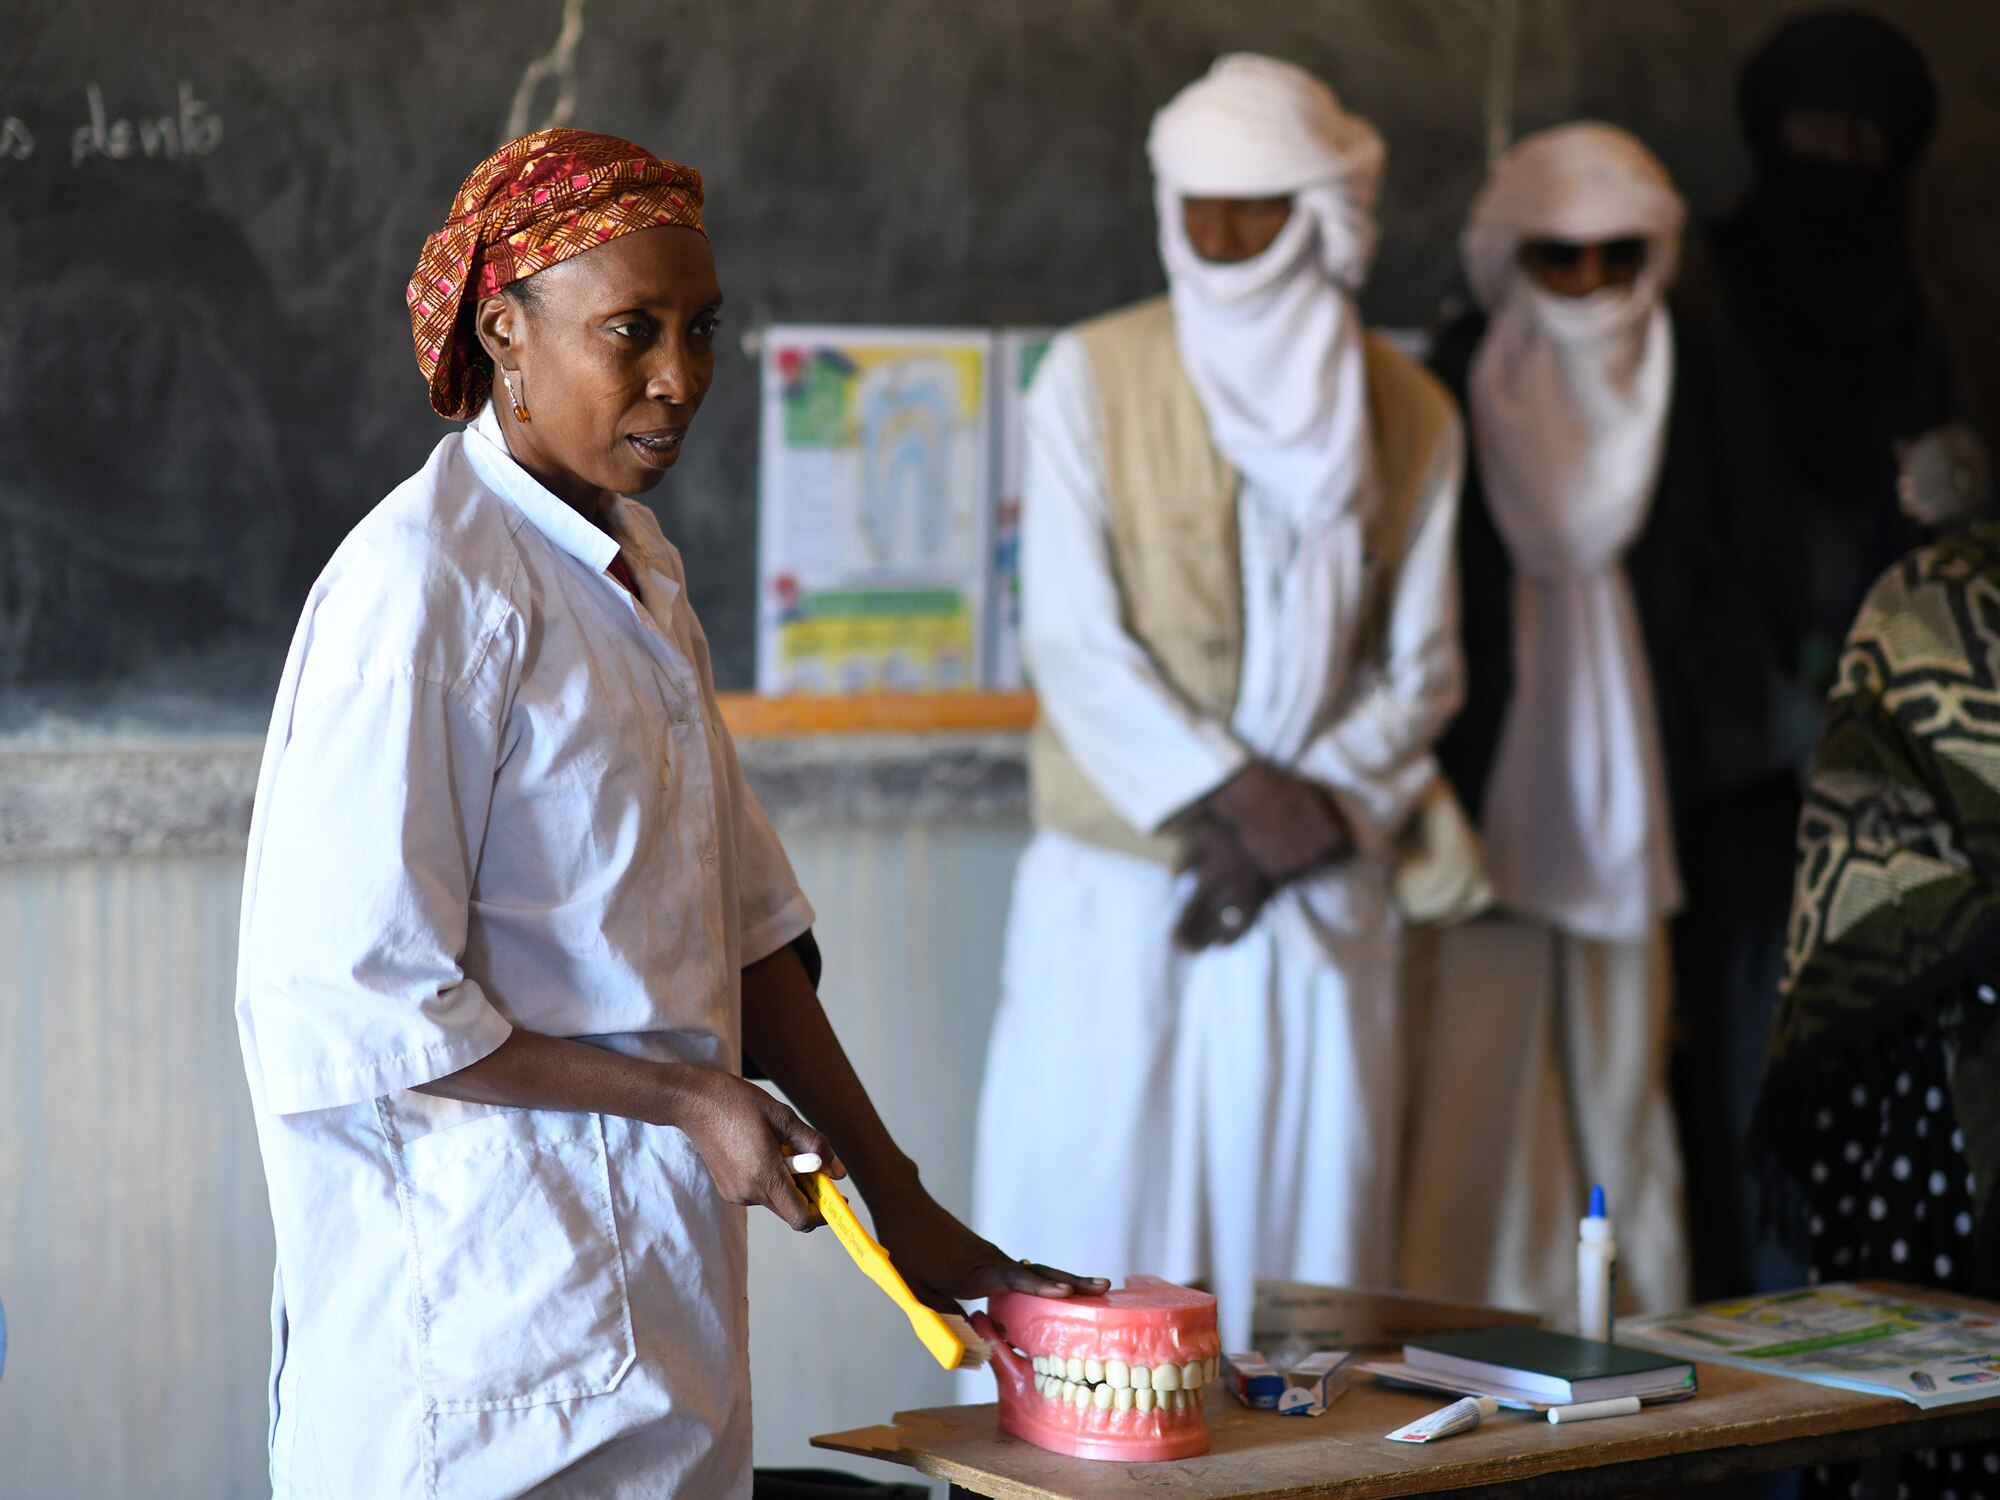 Dr. Mahaman Aicha, an Agadez city dentist, teaches a dental hygiene course to local school children in the village of Tsakatalam, Niger, Dec. 14, 2019. The U.S. Army 443rd Civil Affairs Battalion Civil Affairs Team 219 deployed to Nigerien Air Base 201 partnered with the dentist to teach the Tsakatalam Primary School students for the first time how to properly brush and floss their teeth and the importance of good oral health. (U.S. Air Force photo by Staff Sgt. Alex Fox Echols III)